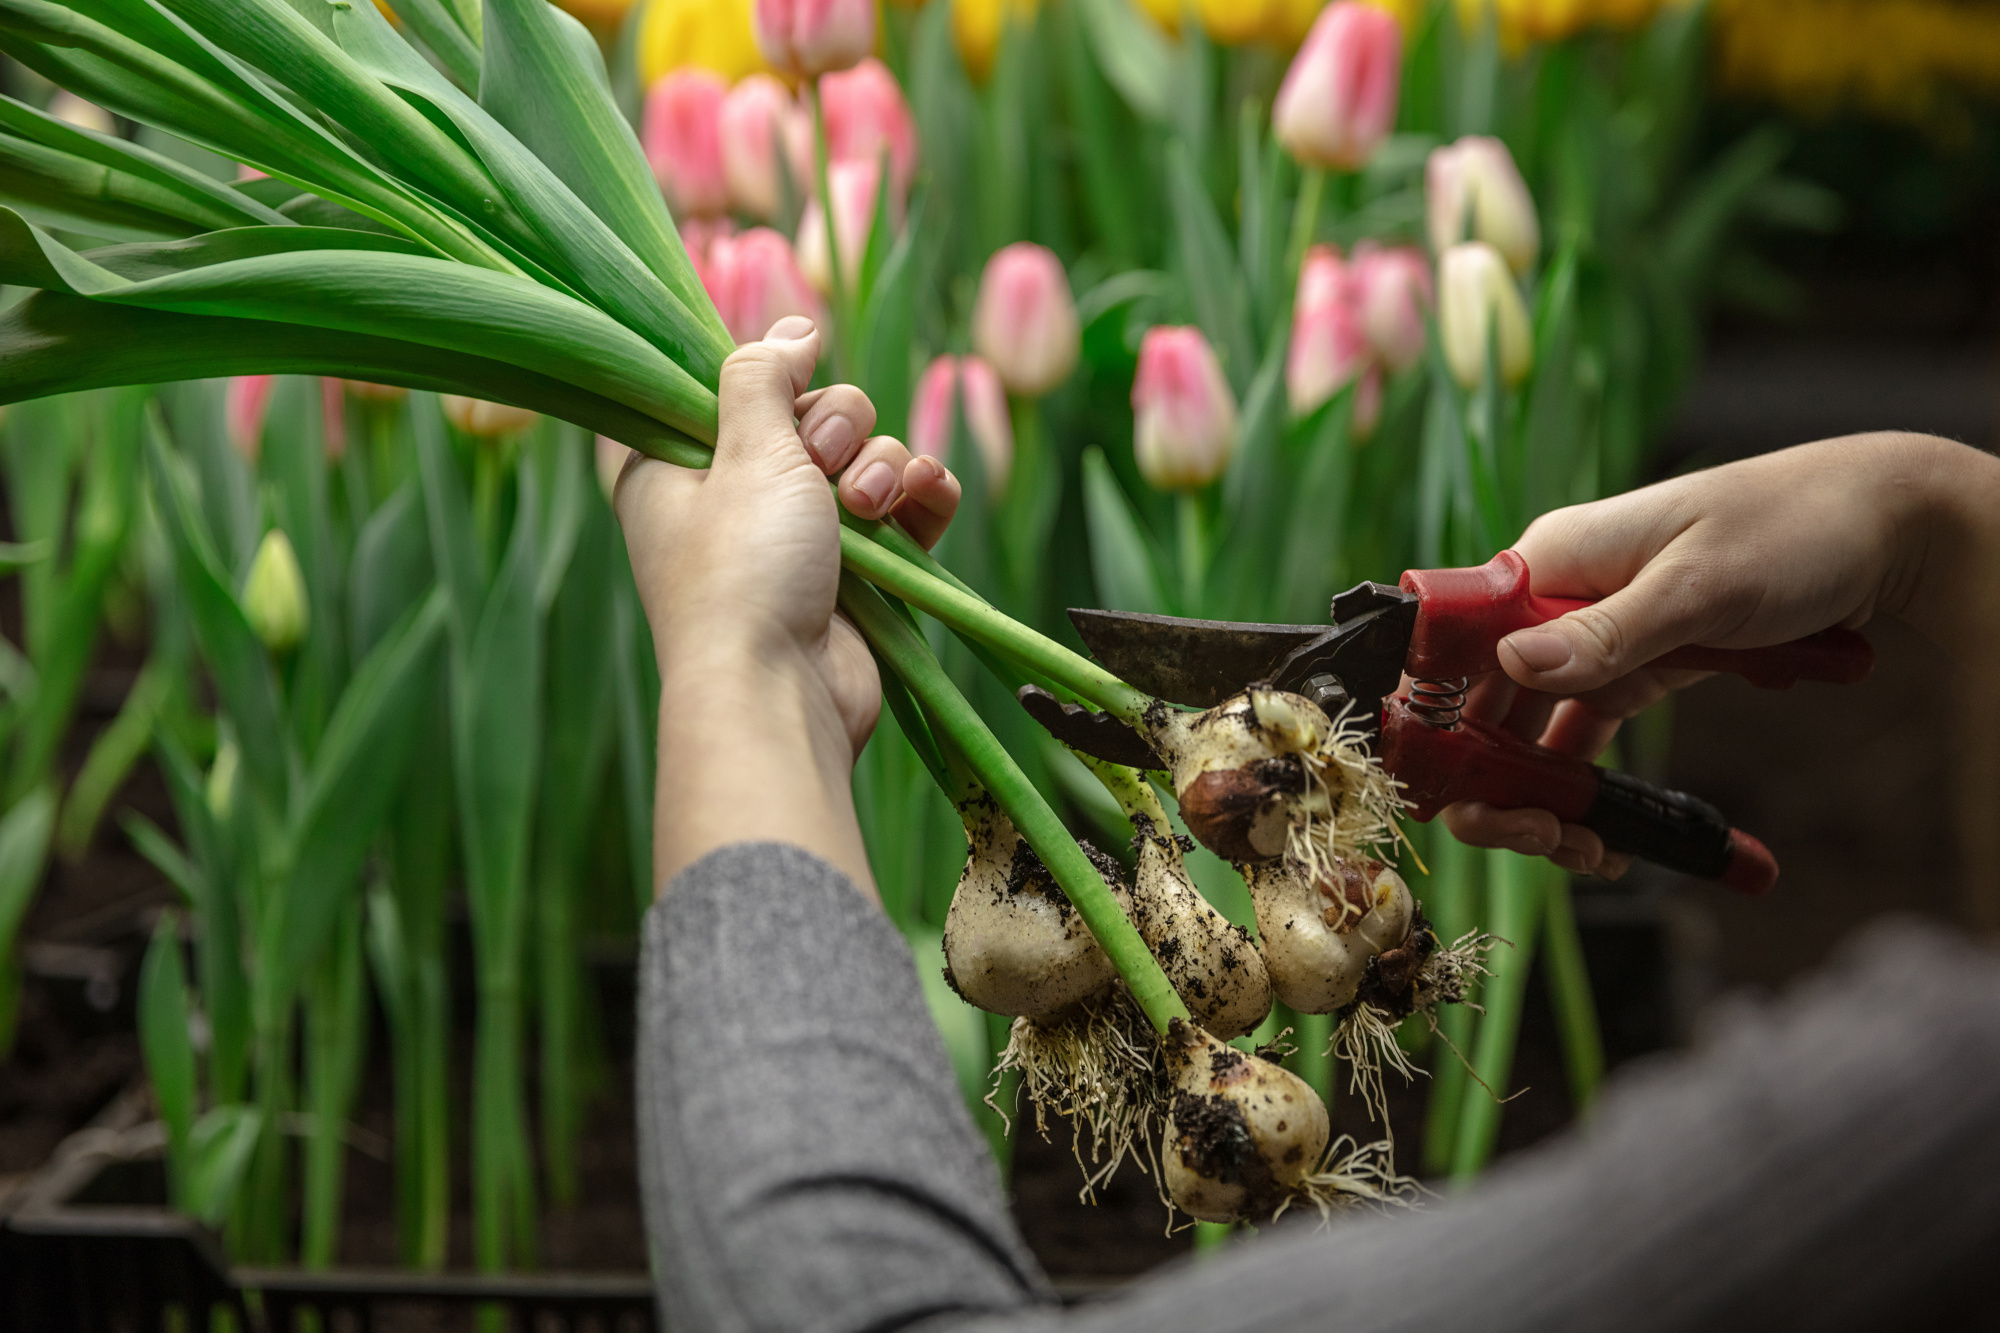 growing-tulips-in-a-greenhouse-crafted-manufacture-for-your-celebration-selected-spring-flowers-in-tender-pink-colors-mother-s-woman-s-day-preparation-for-holidays-brightful-bouquet-making-of.jpg